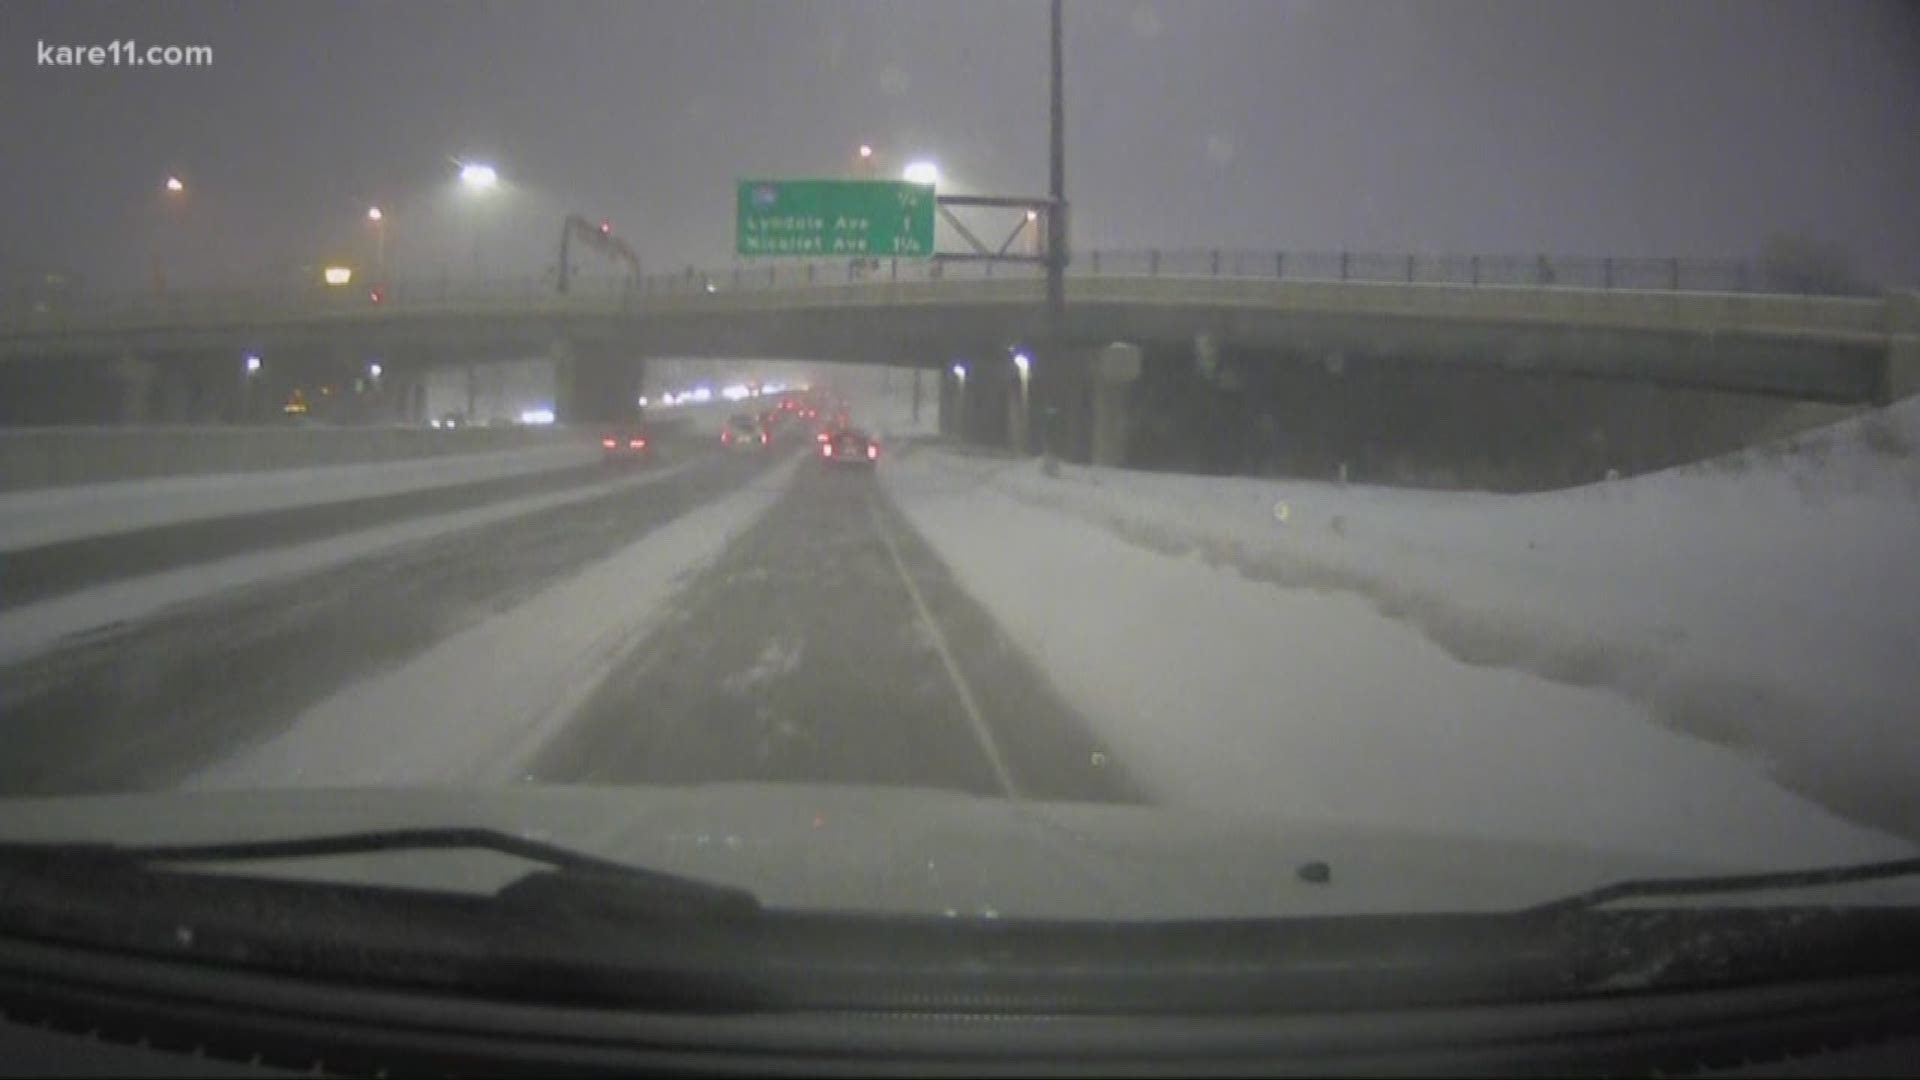 MnDOT is warning south central Minnesota about dangerous driving conditions during the Wednesday morning commute. KARE 11's Kiya Edwards described the conditions from Mobile 11. https://kare11.tv/2DVo0hP